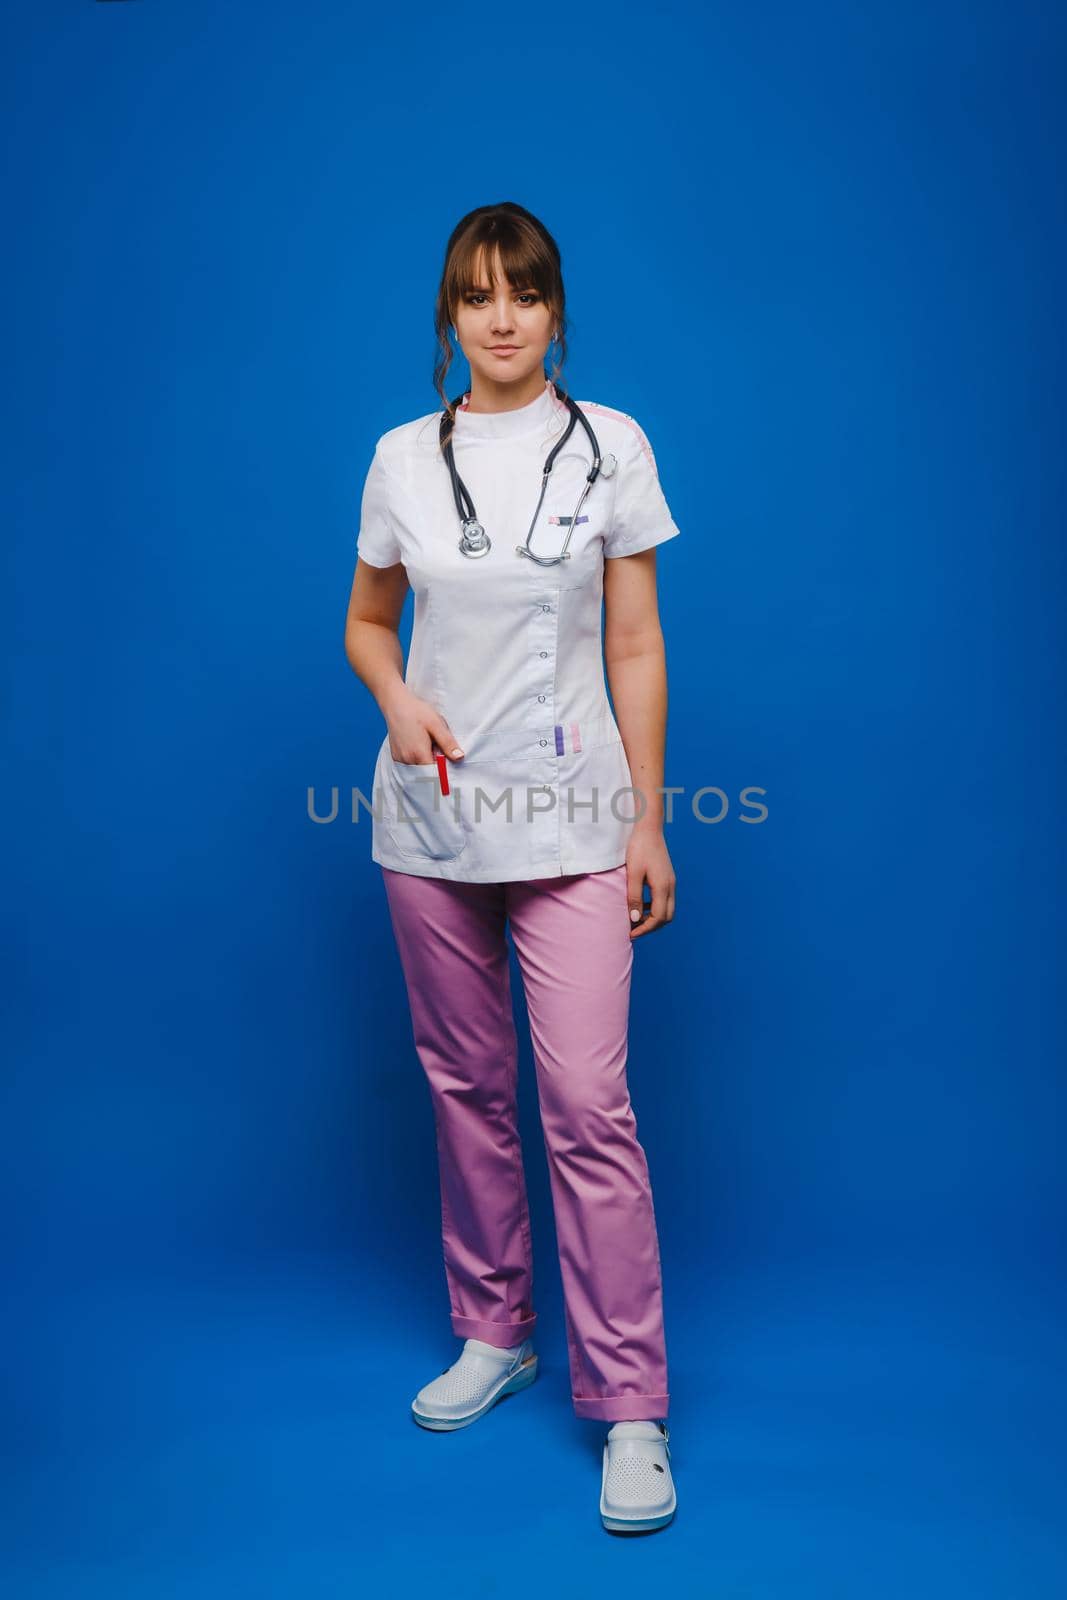 A female doctor, gesticulating, checks the heartbeat in the doctor's office at the hospital with a stethoscope isolated on a blue background.